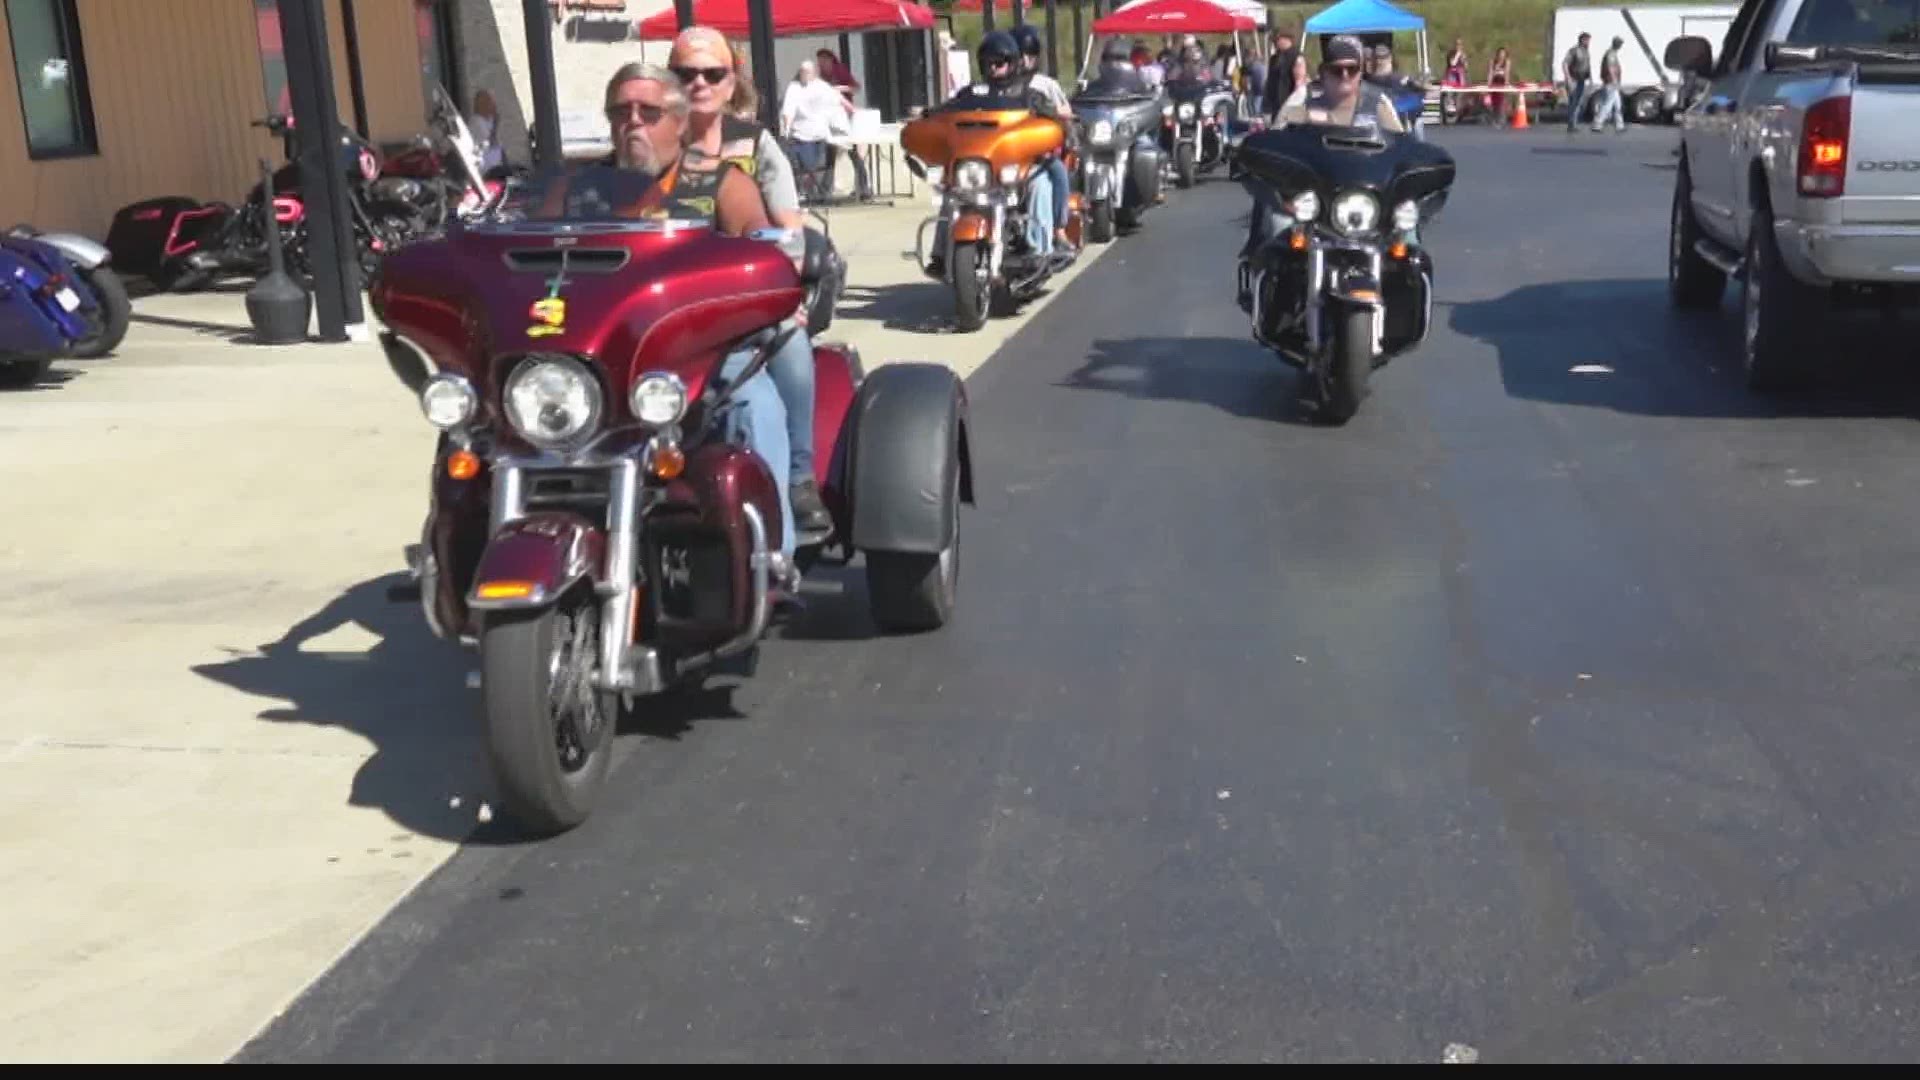 Hundreds of bikers came together Saturday to ride and show support for Veterans.